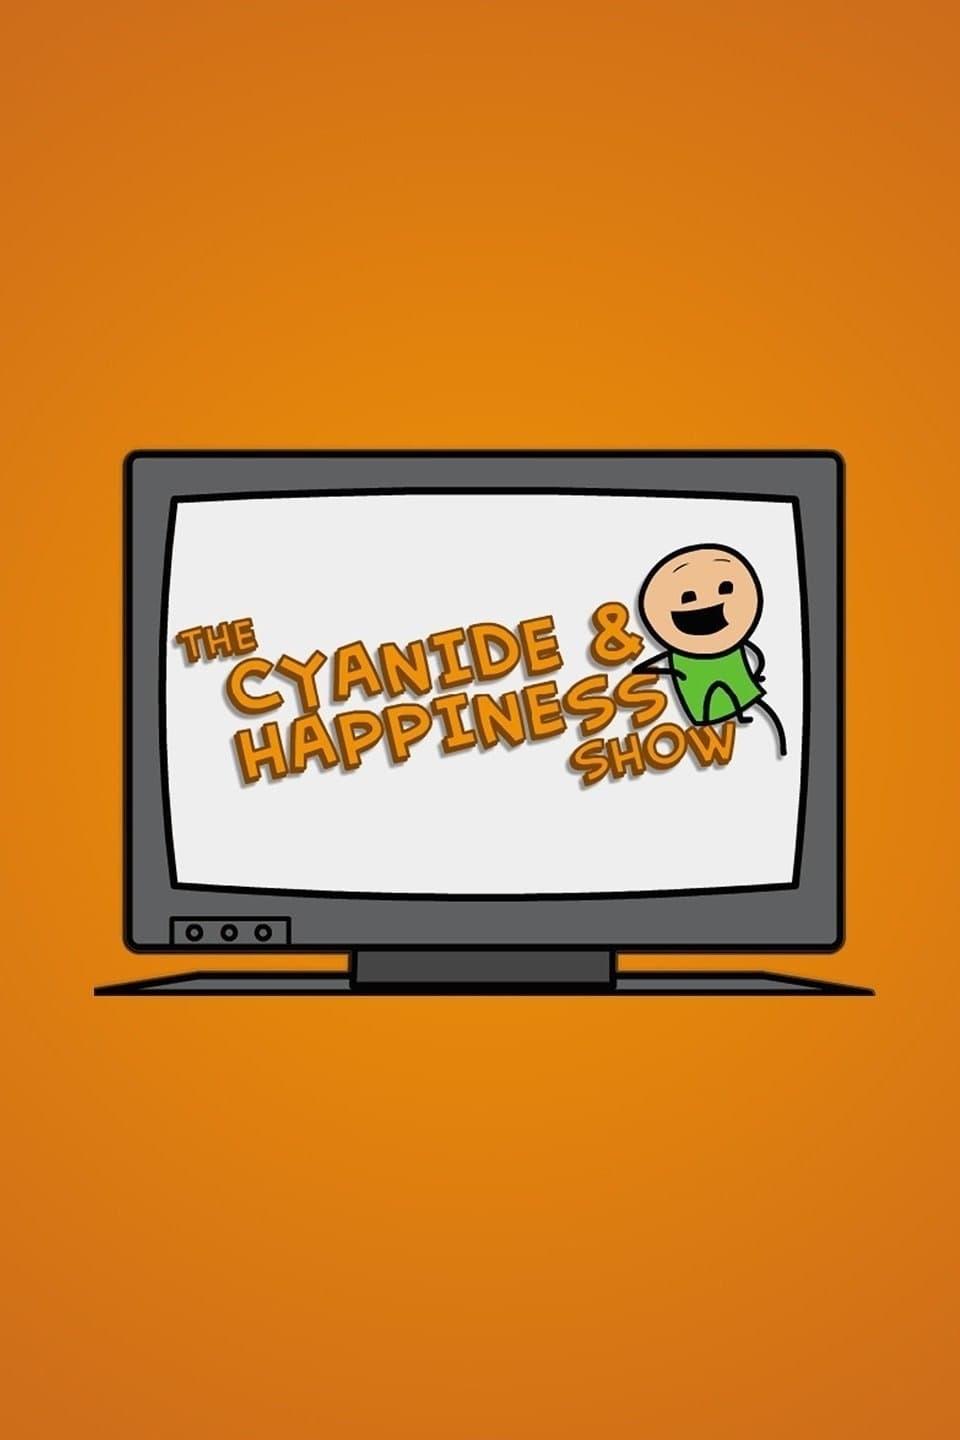 The Cyanide & Happiness Show poster